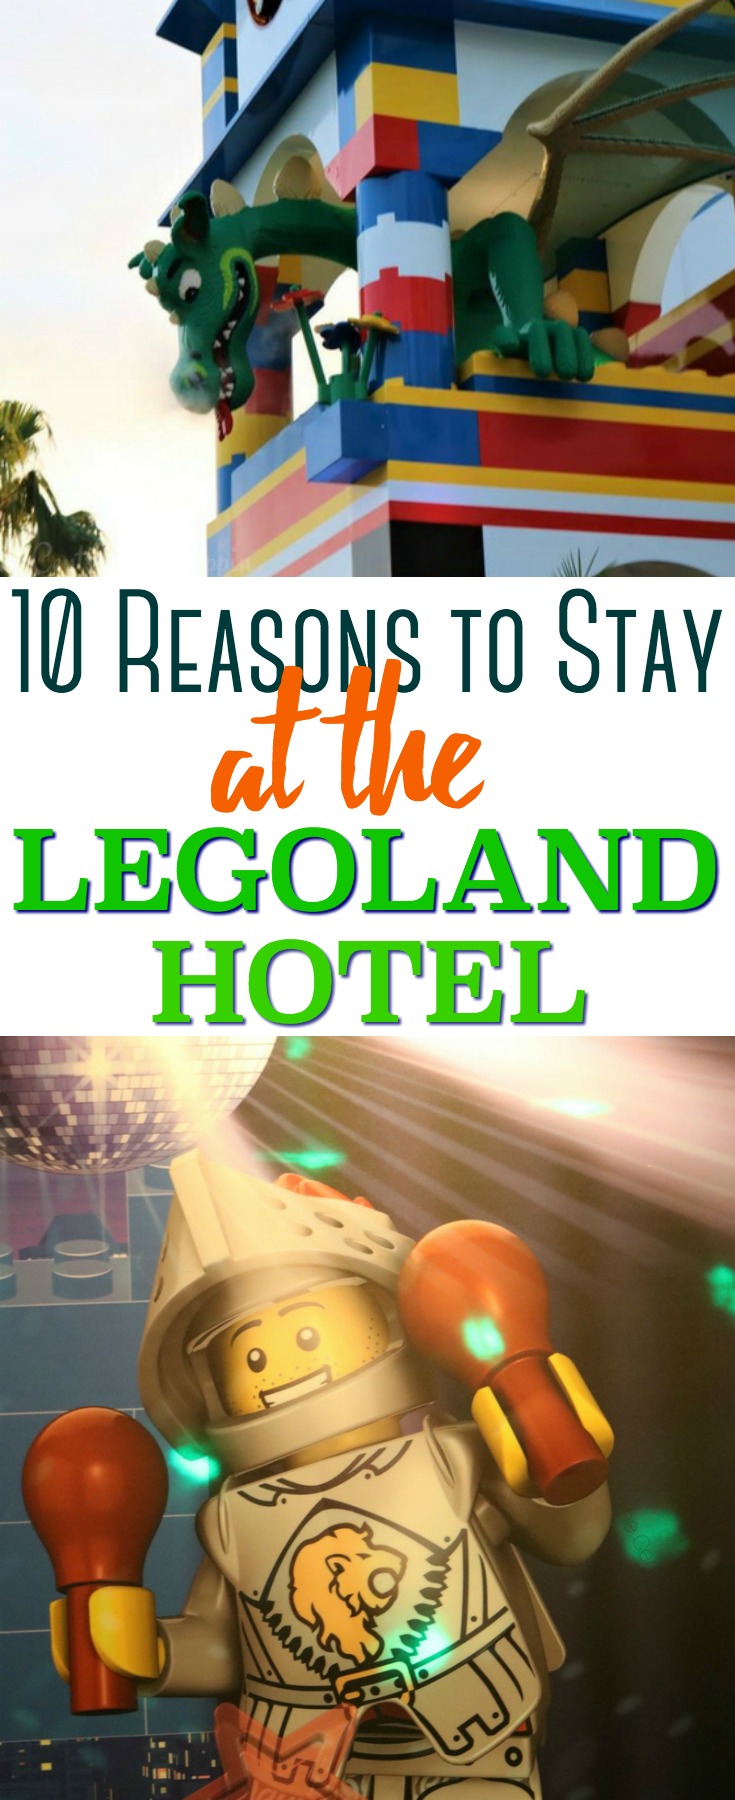 The top ten reasons to stay at the LEGOLAND Hotel with your family, and experience the ultimate LEGO experience that'll keep you going back!